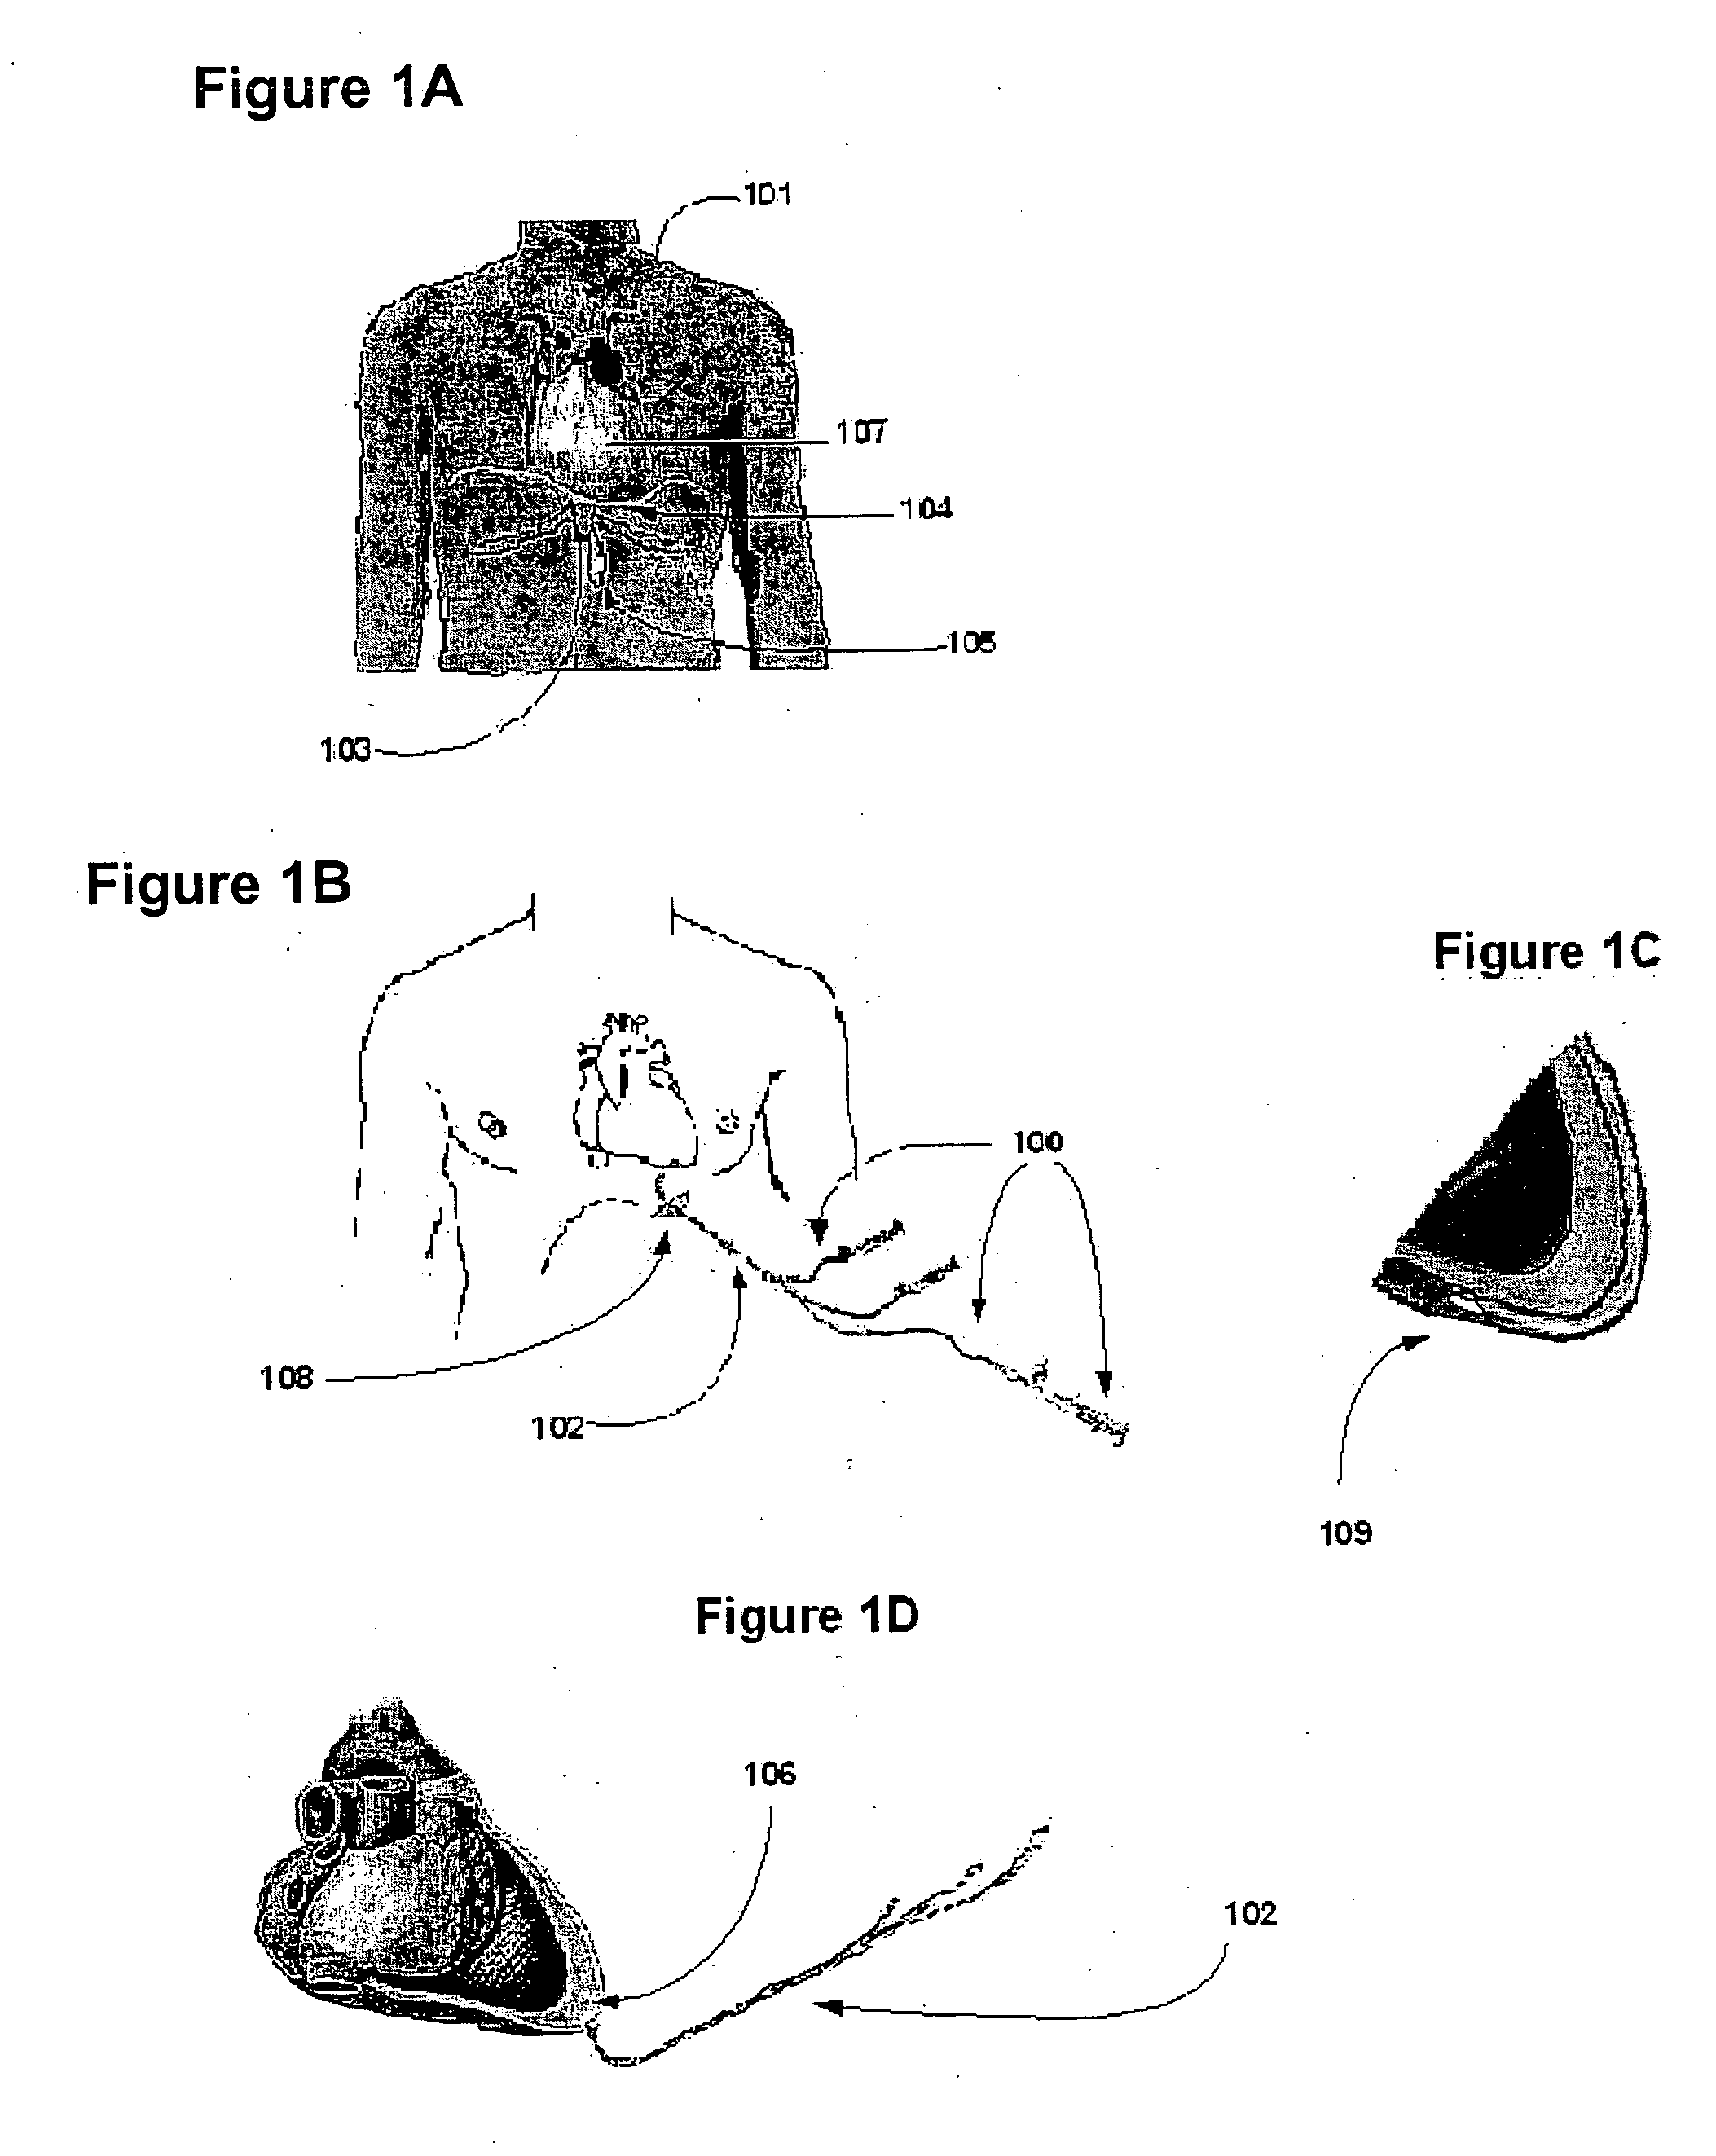 Biodegradable pericardia constraint system and method